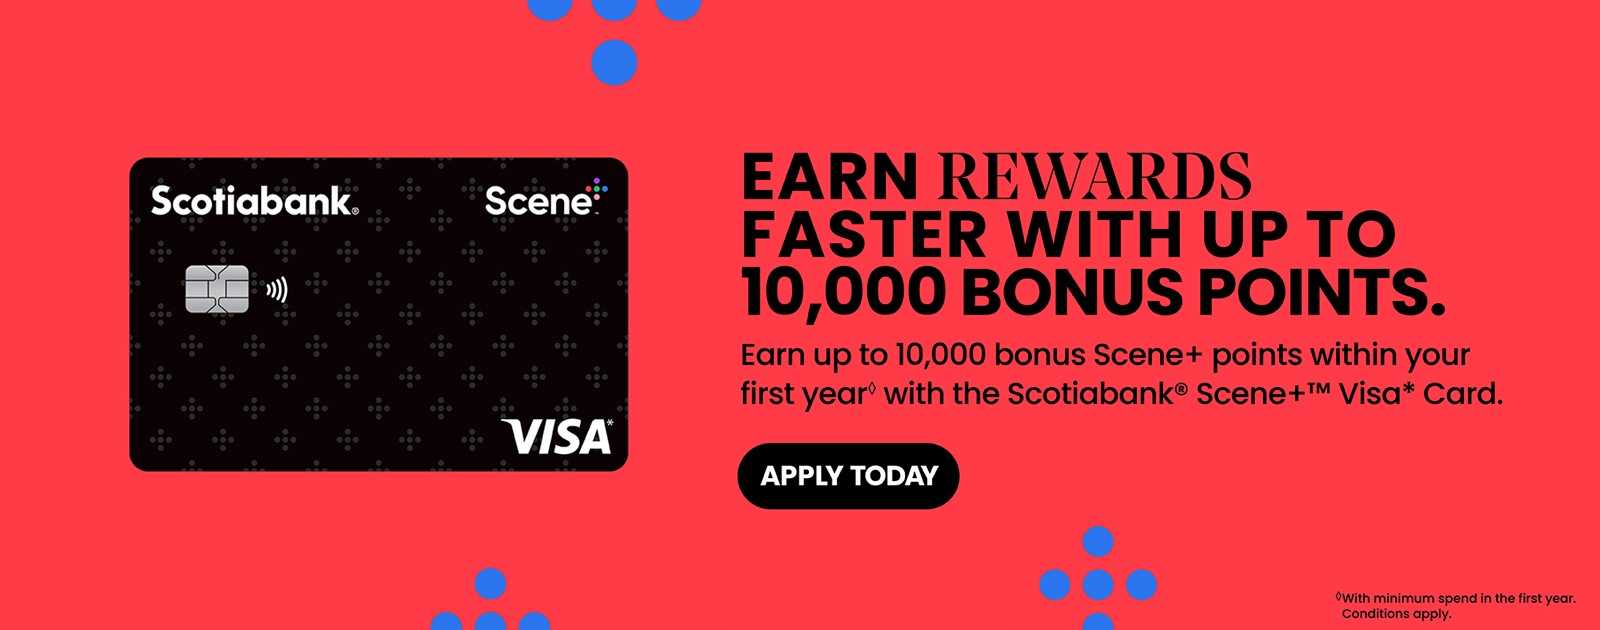 Text Reading 'Earn rewards faster with up to 10,000 bonus points. Earn up to 10,000 bonus Scene+ points within your first year with the Scotiabank Scene+ Visa Card. You can 'Apply Today' by clicking on the button below.'